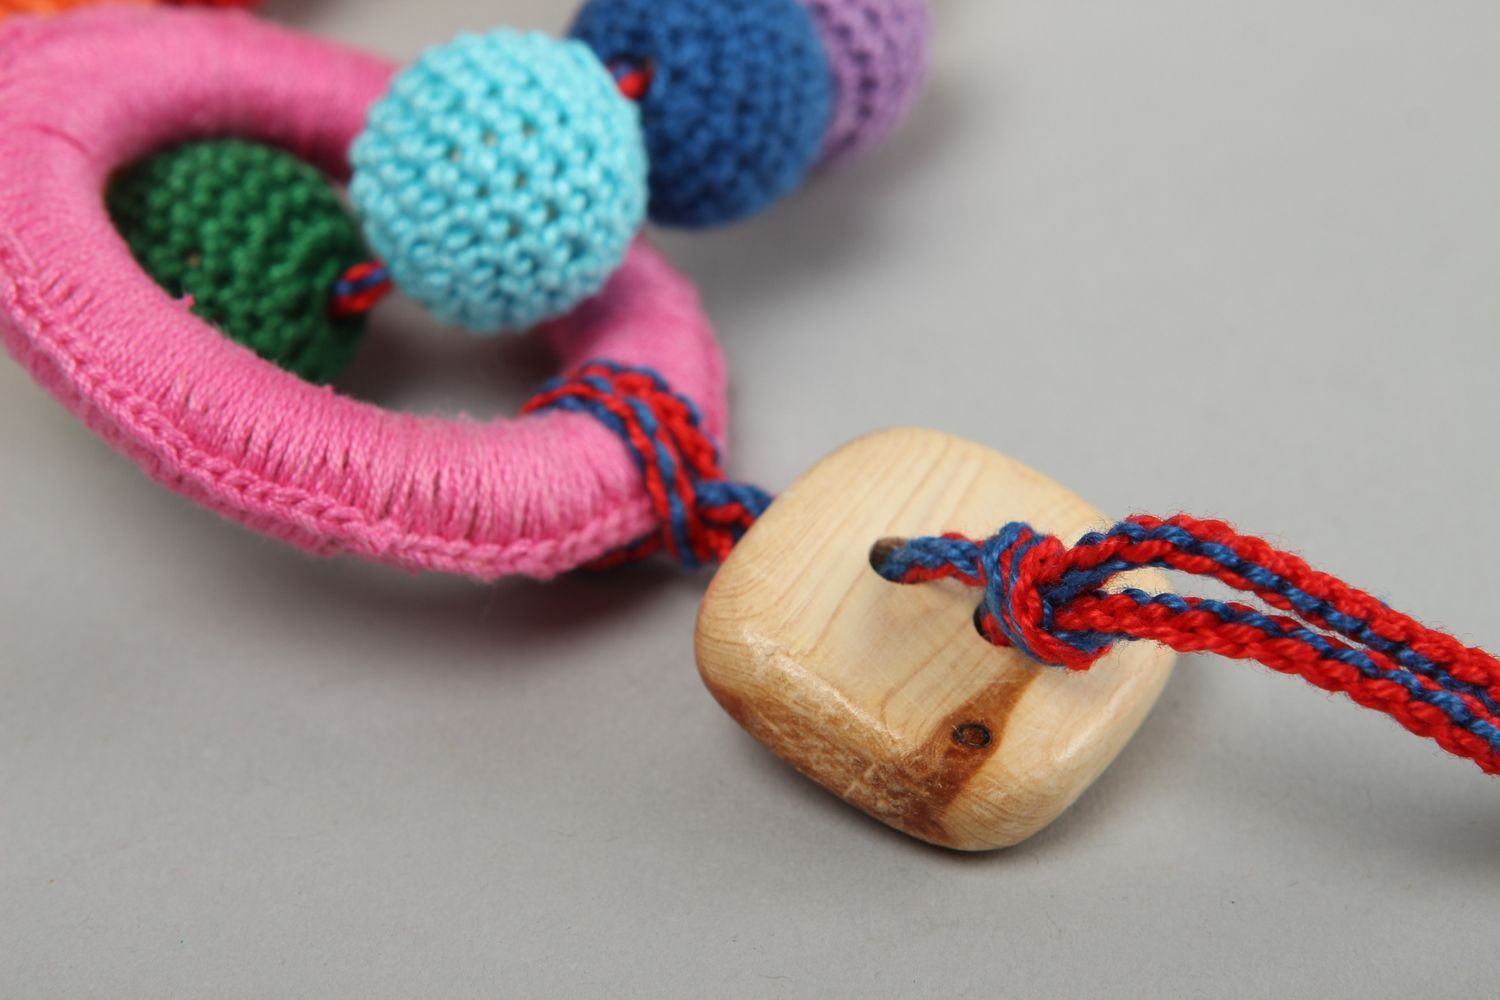 Handmade wooden teething toy childrens toys baby toys crochet ideas small gifts photo 4